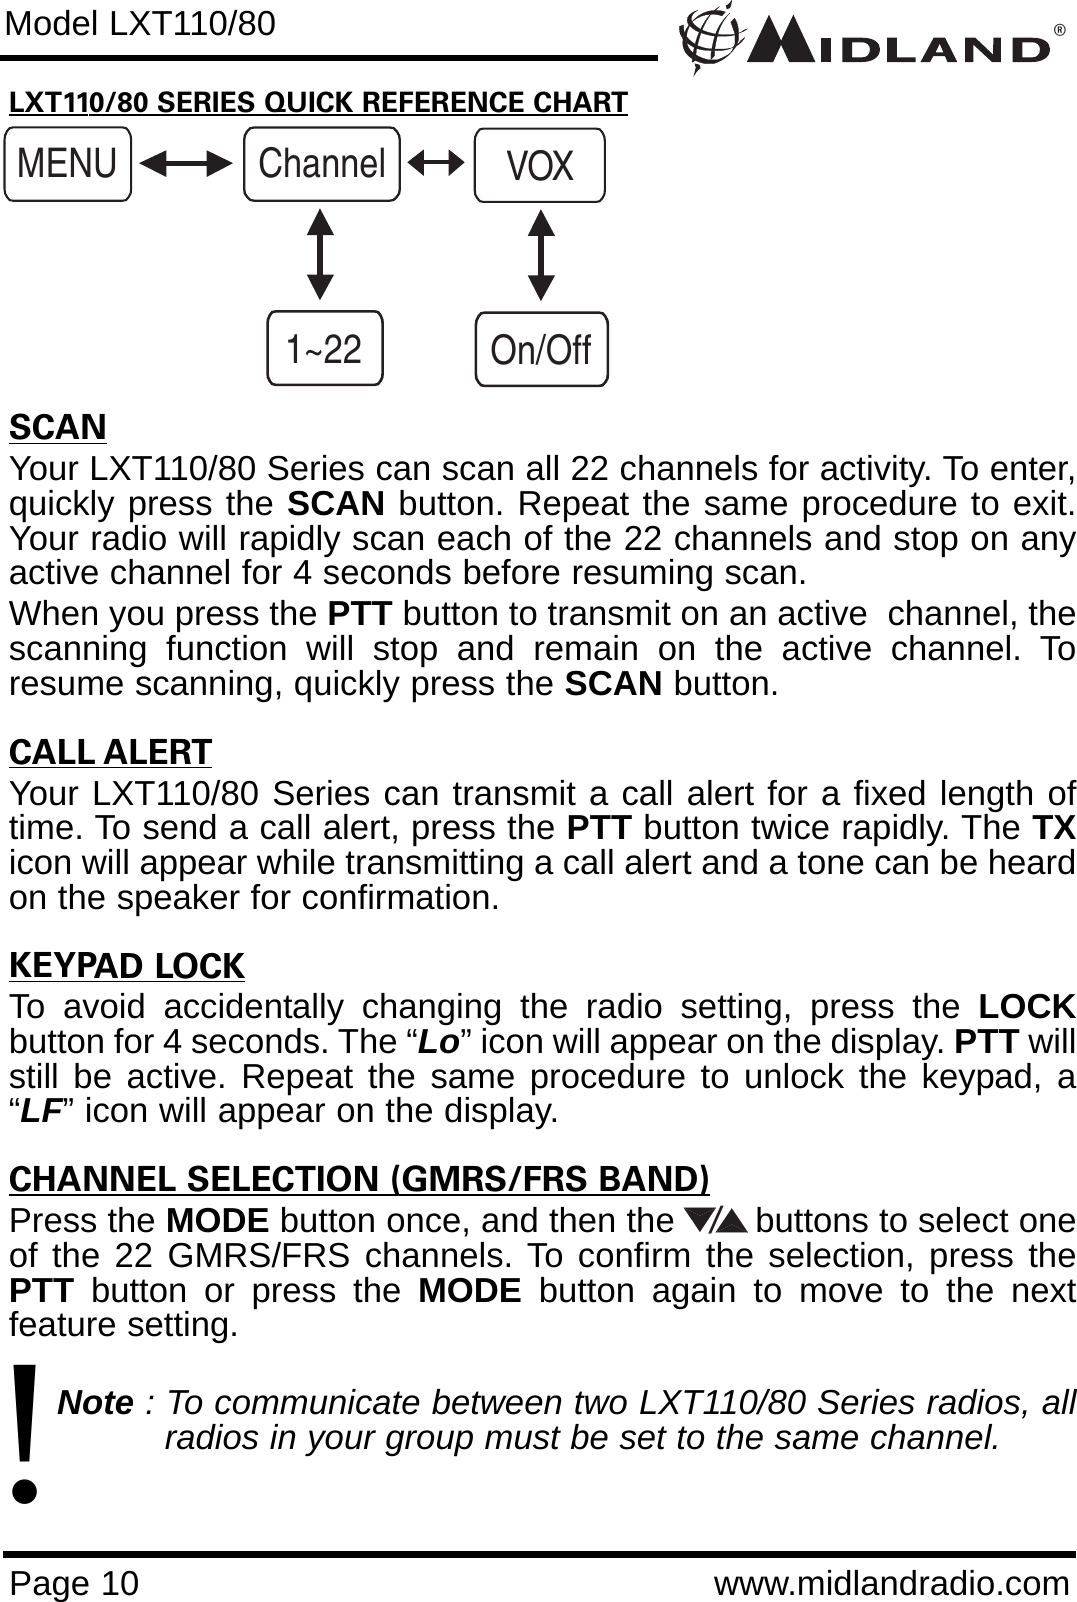 ®Page 10 www.midlandradio.comLXT110/80 SERIES QUICK REFERENCE CHARTSCANYour LXT110/80 Series can scan all 22 channels for activity. To enter,quickly press the SCAN button. Repeat the same procedure to exit.Your radio will rapidly scan each of the 22 channels and stop on anyactive channel for 4 seconds before resuming scan.When you press the PTT button to transmit on an active  channel, thescanning function will stop and remain on the active channel. Toresume scanning, quickly press the SCAN button.CALL ALERTYour LXT110/80 Series can transmit a call alert for a fixed length oftime. To send a call alert, press the PTT button twice rapidly. The TXicon will appear while transmitting a call alert and a tone can be heardon the speaker for confirmation. KEYPAD LOCKTo avoid accidentally changing the radio setting, press the LOCKbutton for 4 seconds. The “Lo” icon will appear on the display. PTT willstill be active. Repeat the same procedure to unlock the keypad, a“LF” icon will appear on the display.CHANNEL SELECTION (GMRS/FRS BAND)Press the MODE button once, and then the        buttons to select oneof the 22 GMRS/FRS channels. To confirm the selection, press thePTT button or press the MODE button again to move to the nextfeature setting.Note : To communicate between two LXT110/80 Series radios, allradios in your group must be set to the same channel.Model LXT110/80MENU Channel1~22VOXOn/Off!/